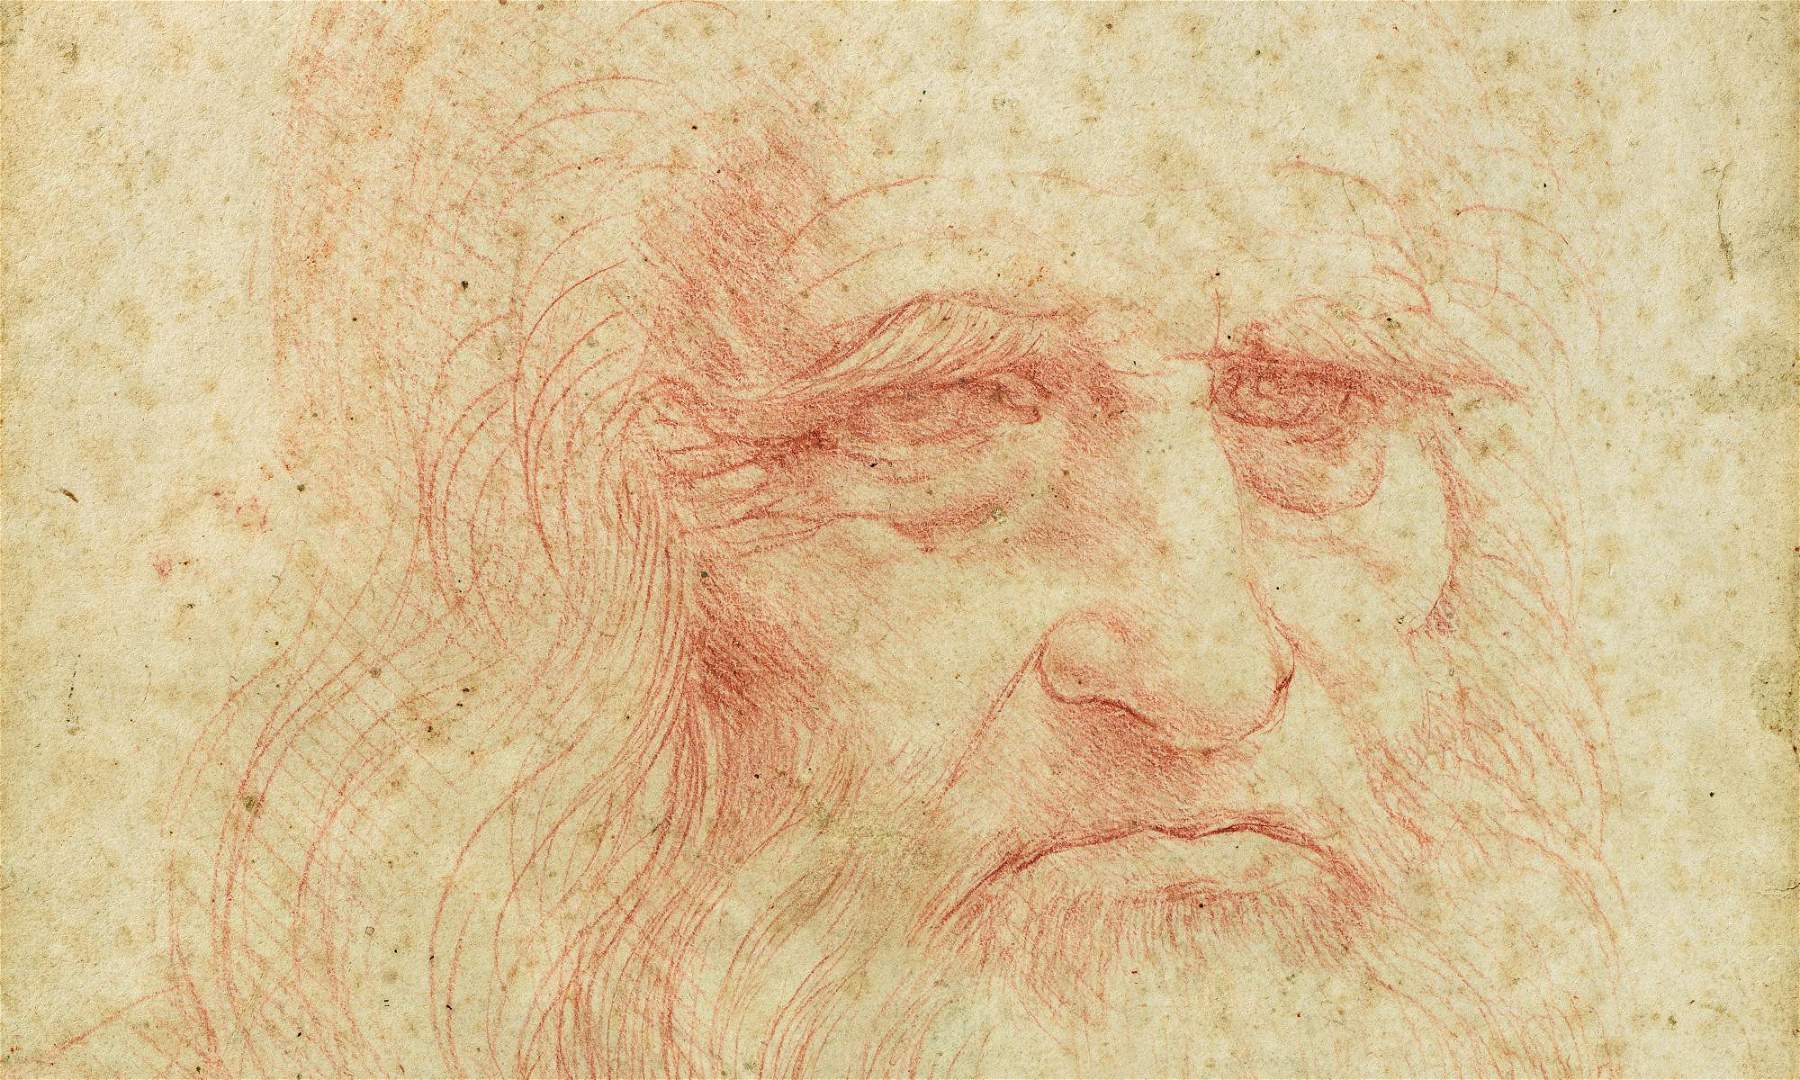 Turin celebrates Leonardo da Vinci with an exhibition of more than fifty drawings, including some masterpieces